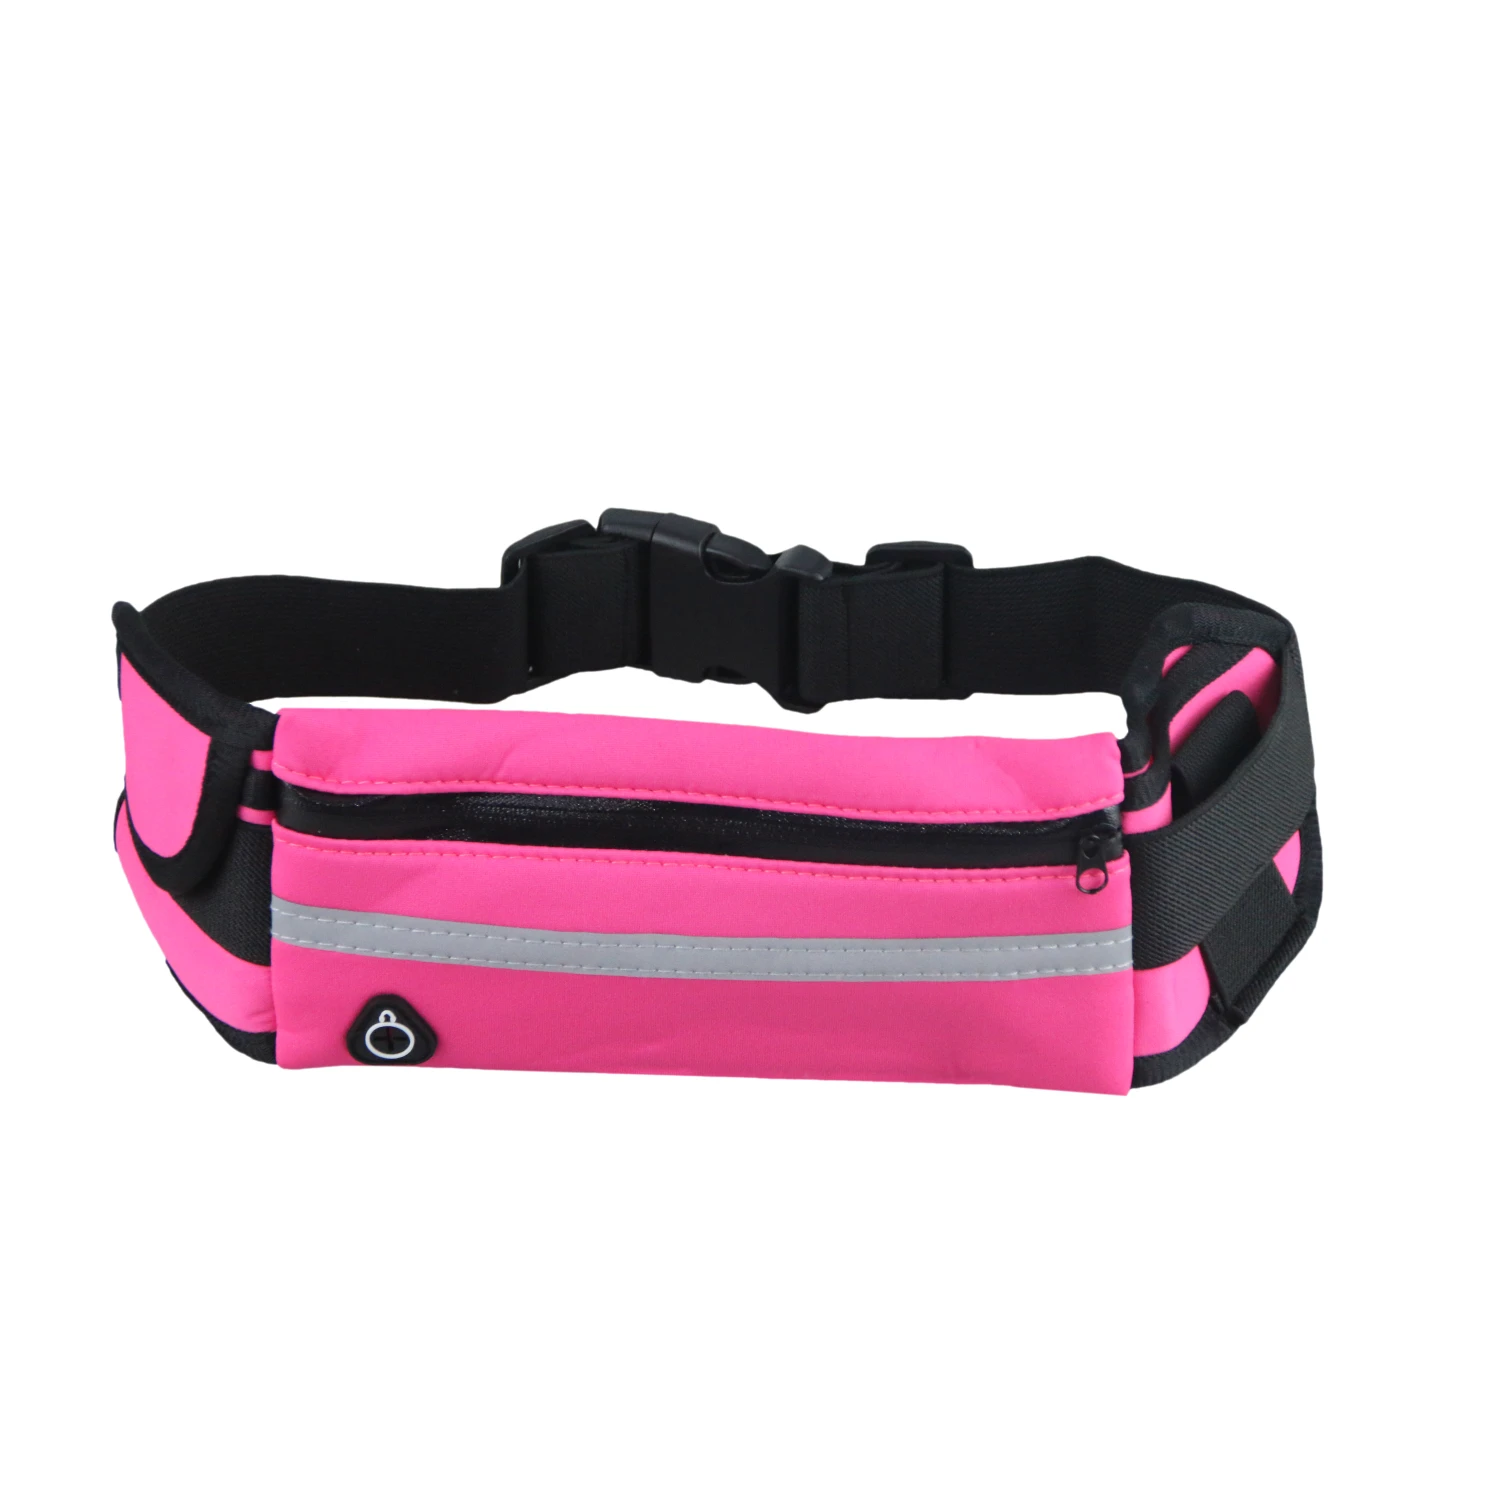 

Waterproof Neoprene Sports Portable Gym Bag Hold Water Cycling Phone Bag Outdoor Running Hiking Fanny Pack tactical backpacks, Pink tactical backpacks